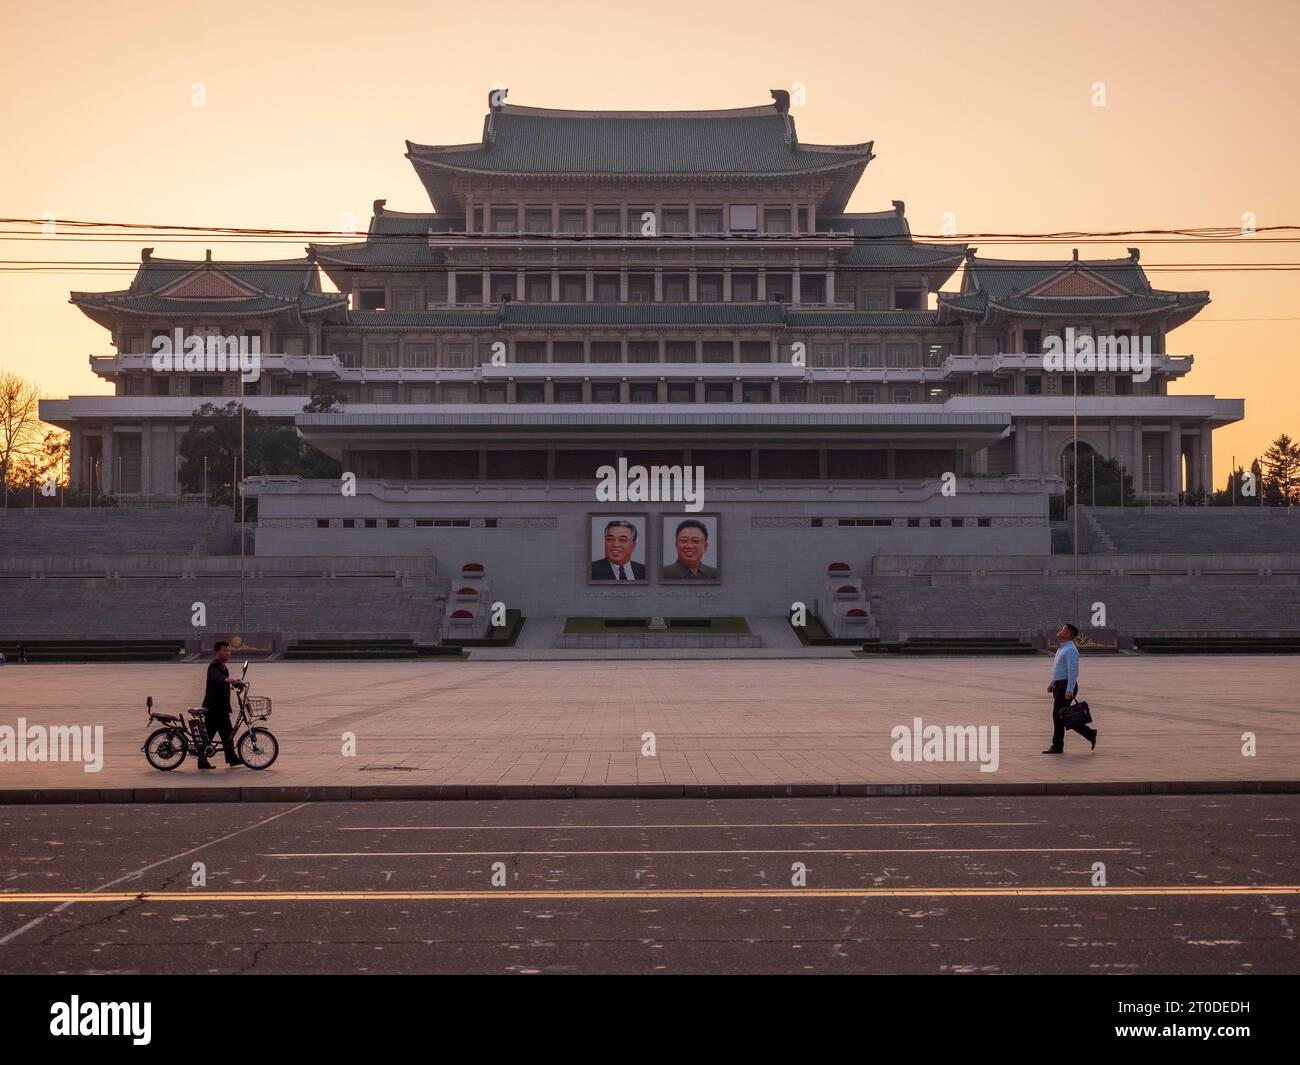 The Grand People's Study House at sunset, Kim Il Sung Square, Pyongyang, North Korea Stock Photo